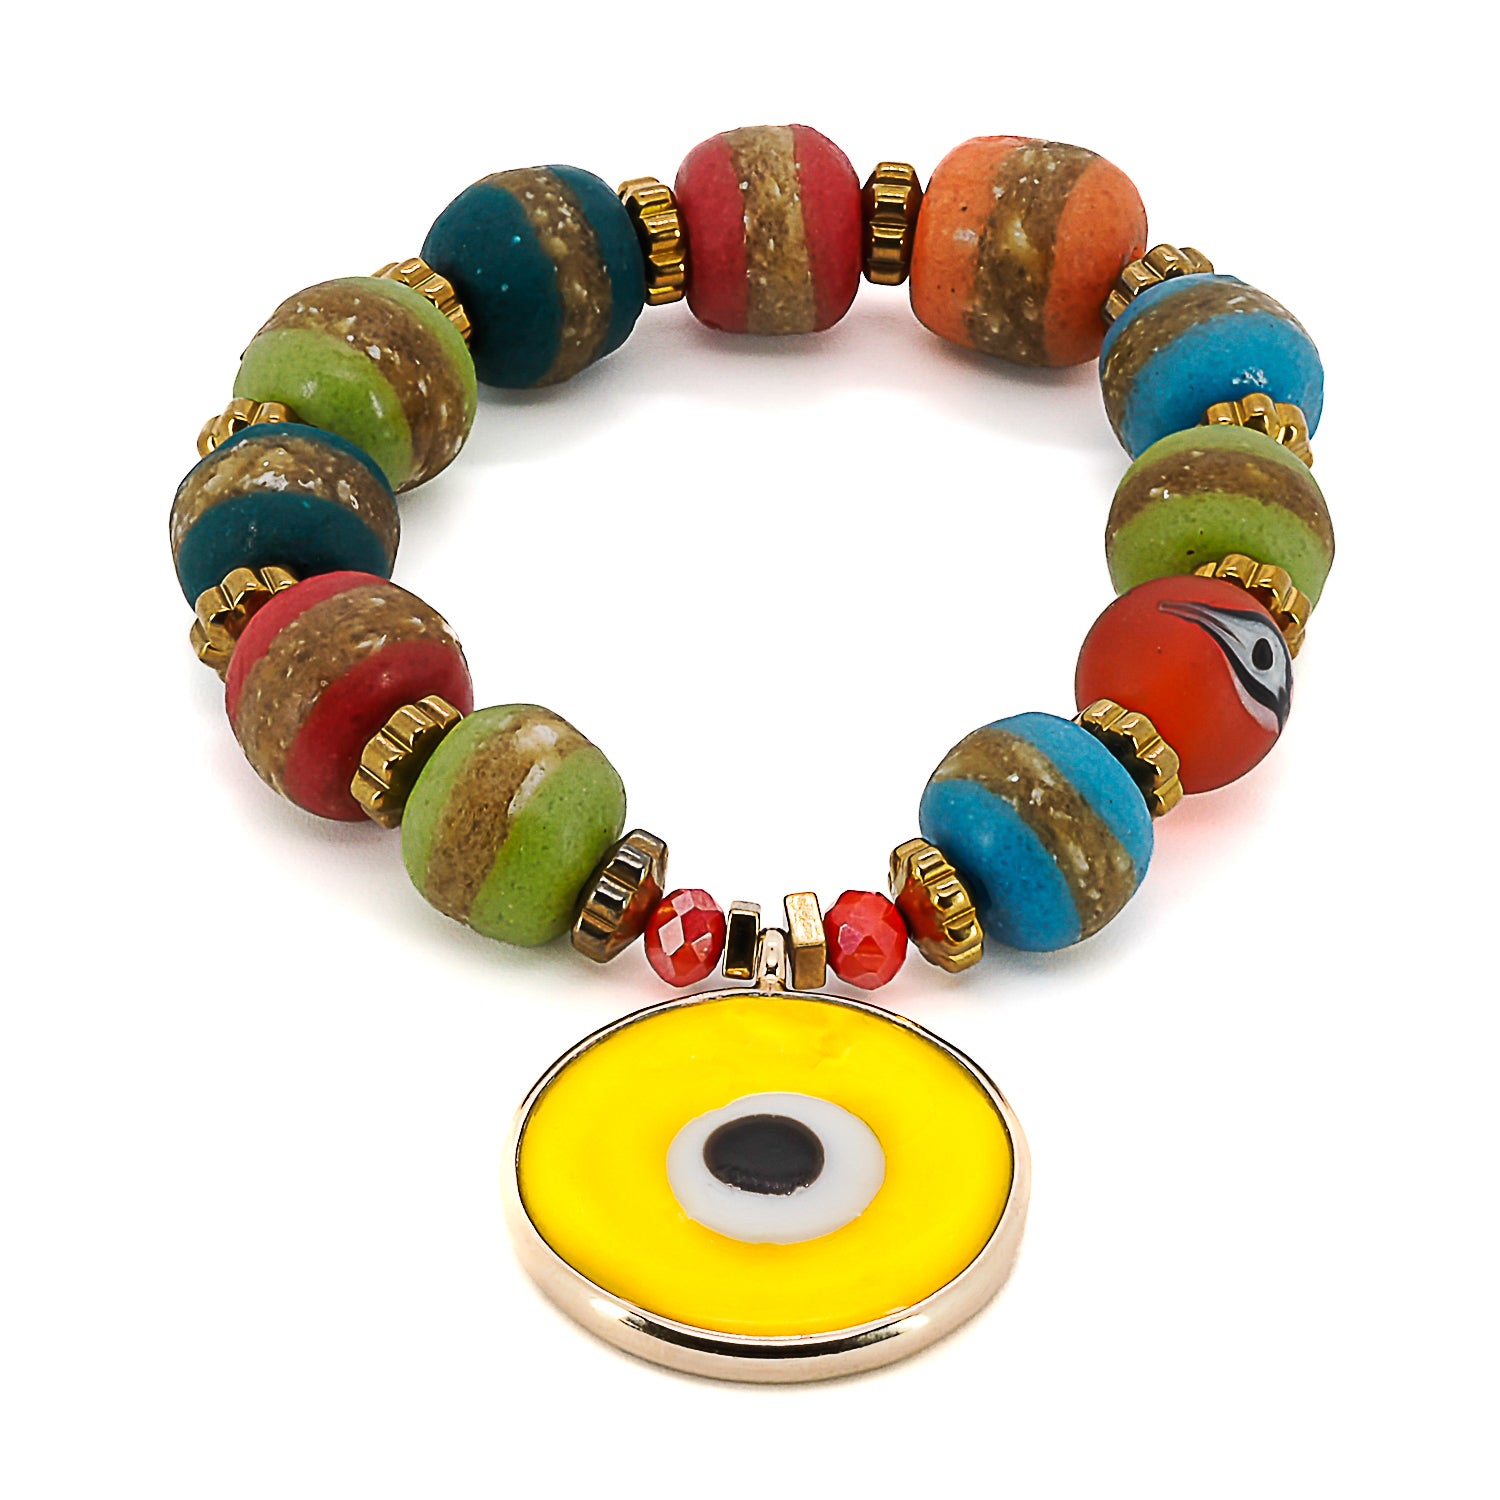 Discover the cheerful and bold design of the Yellow Evil Eye Carpe Diem Bracelet, featuring colorful ceramic beads and an 18K gold-plated yellow glass evil eye charm.